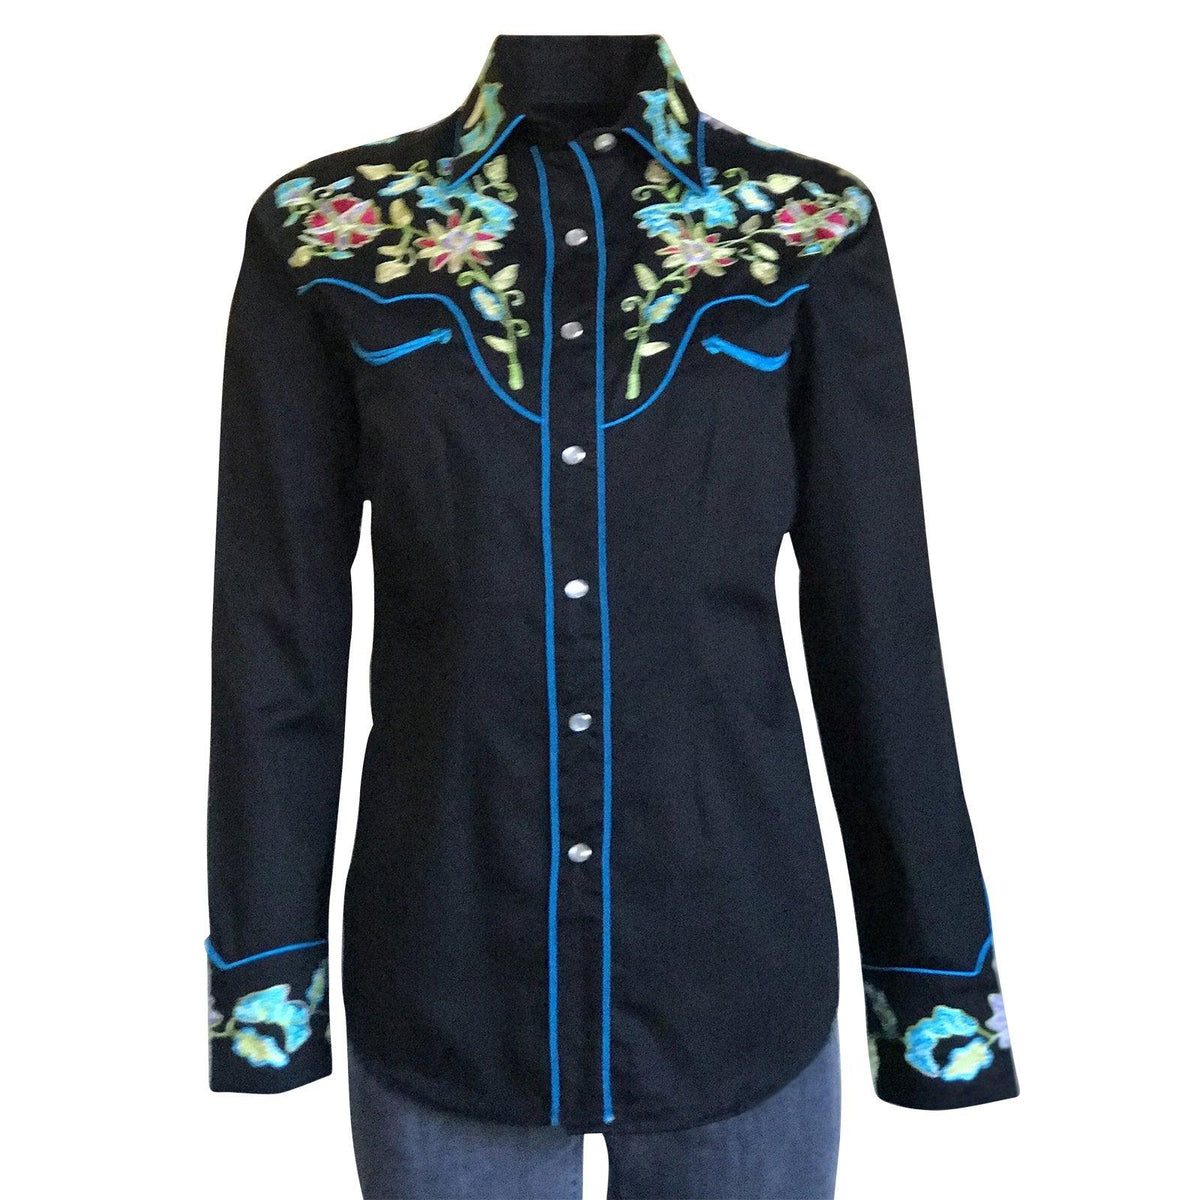 Women's Vintage Floral Bouquet Embroidered Western Shirt - Flyclothing LLC